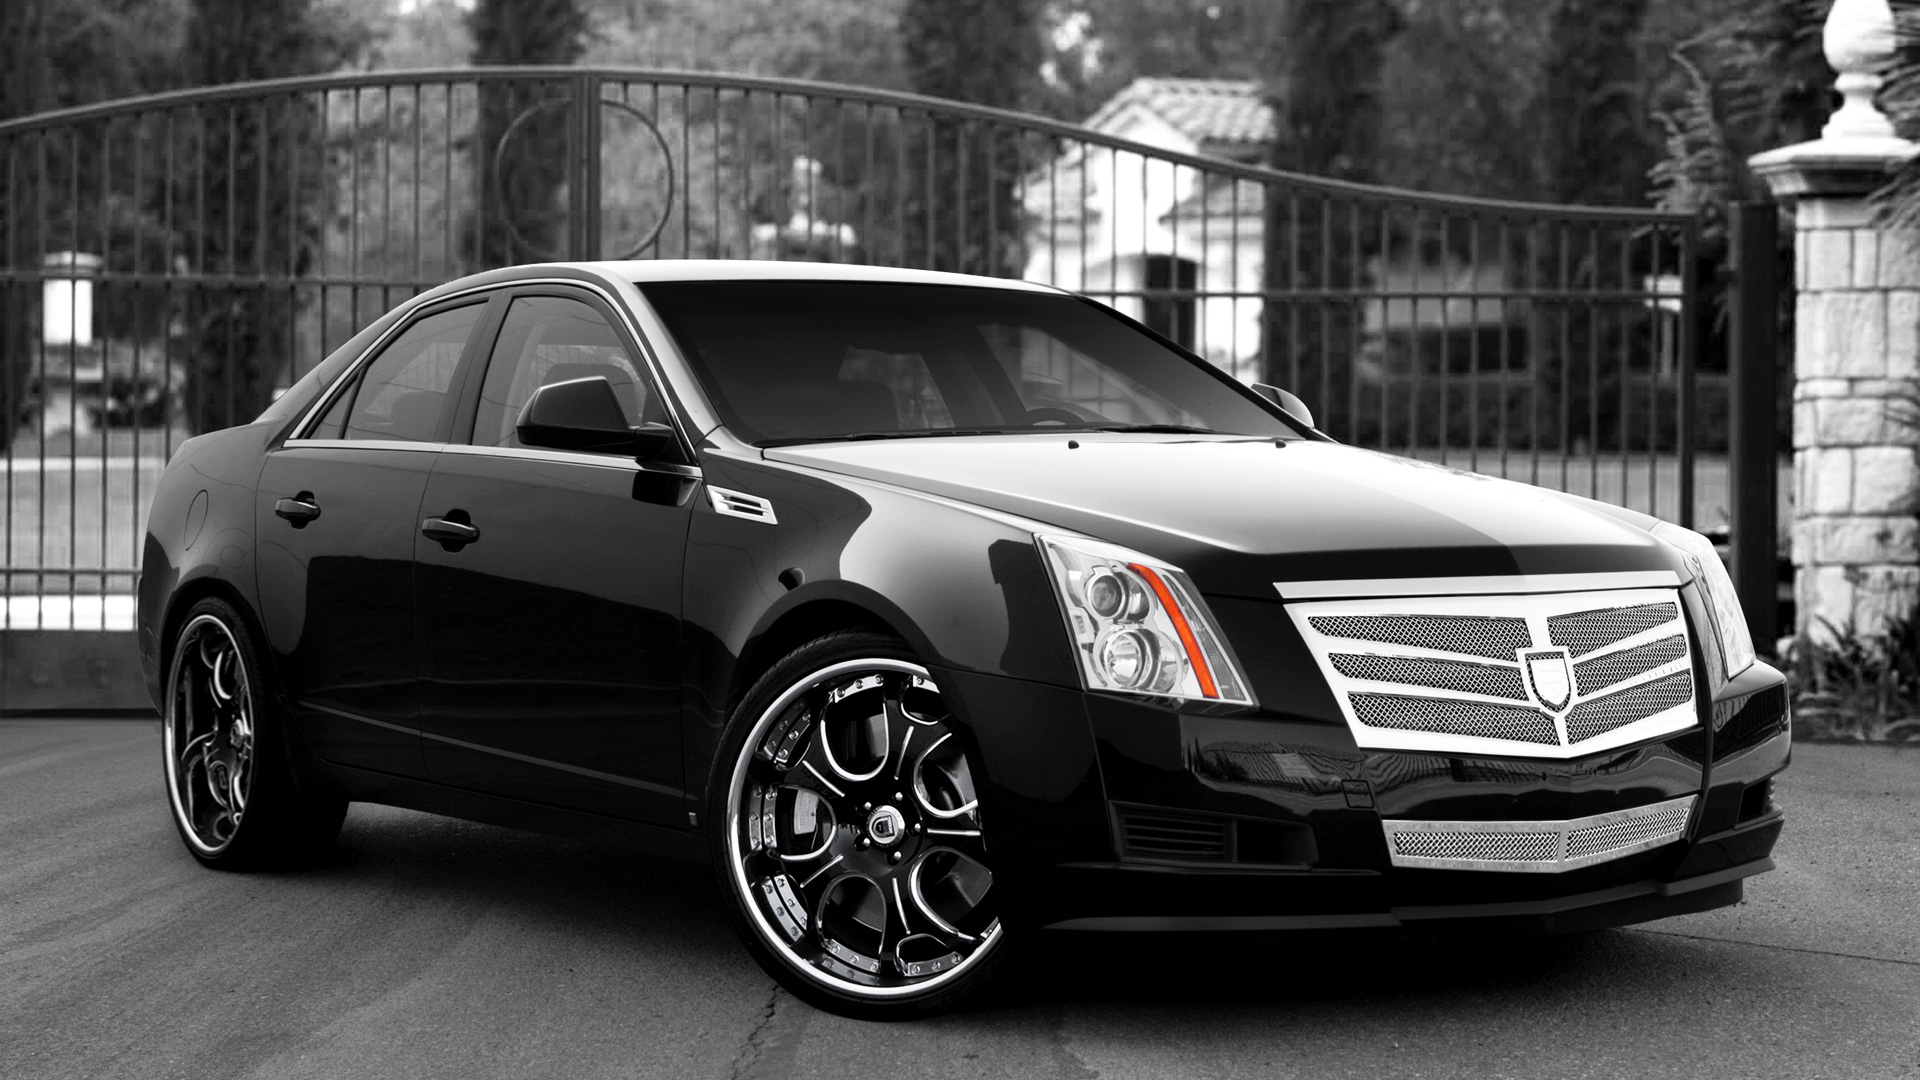 Cadillac Cts Wallpaper High Definition With